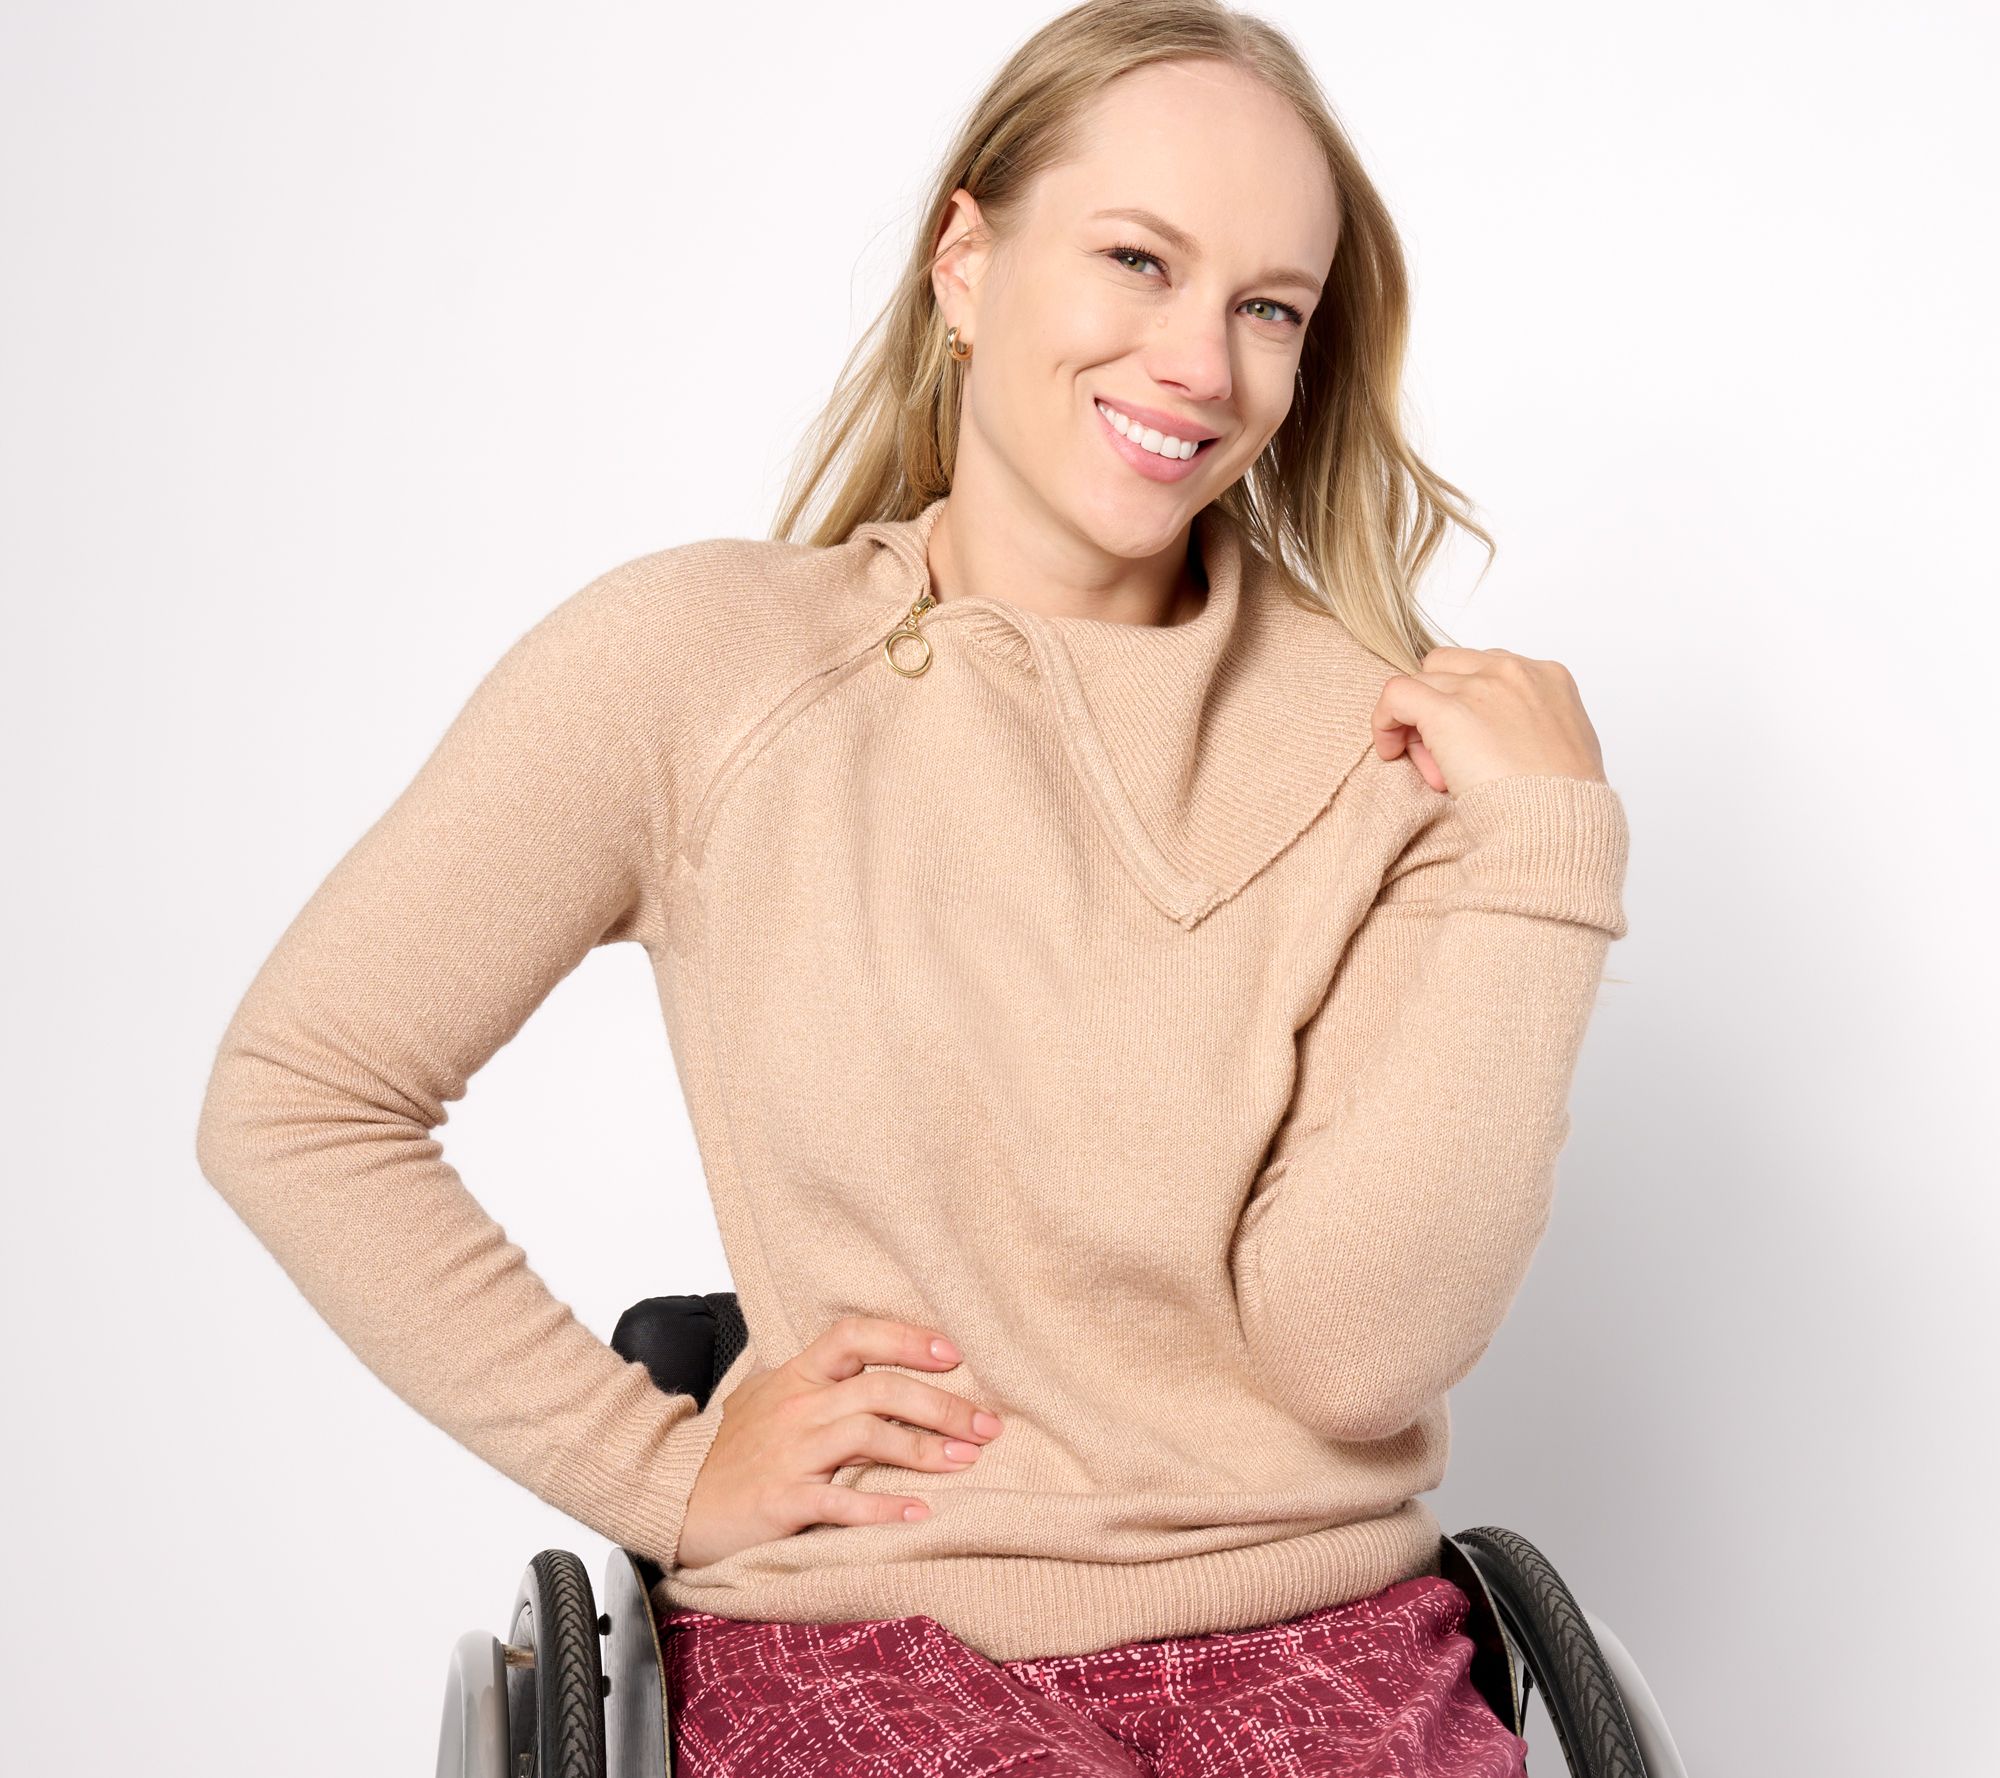 QVC Offers Adaptive Collection Through Its Private Label, Denim & Co.